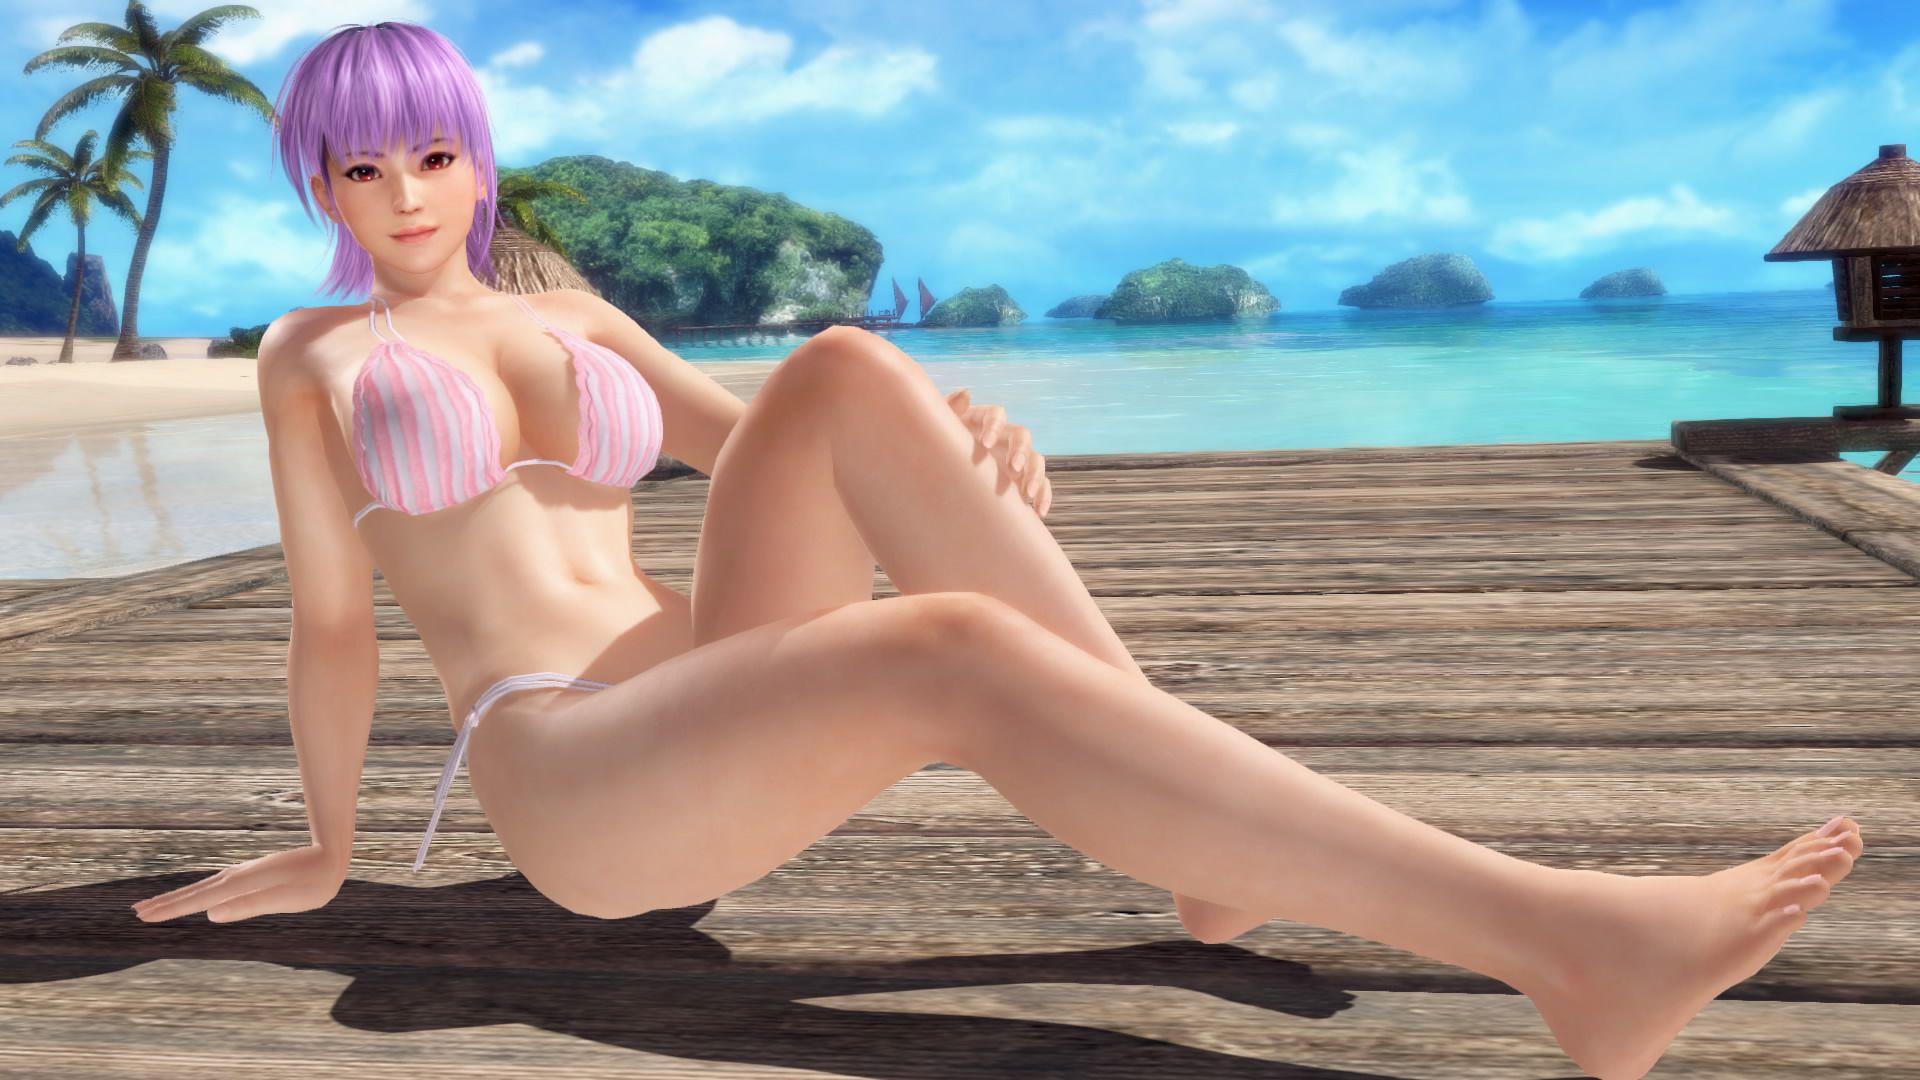 Doax3 "The color which suits the Aya-chan is pink" theory is verified 5